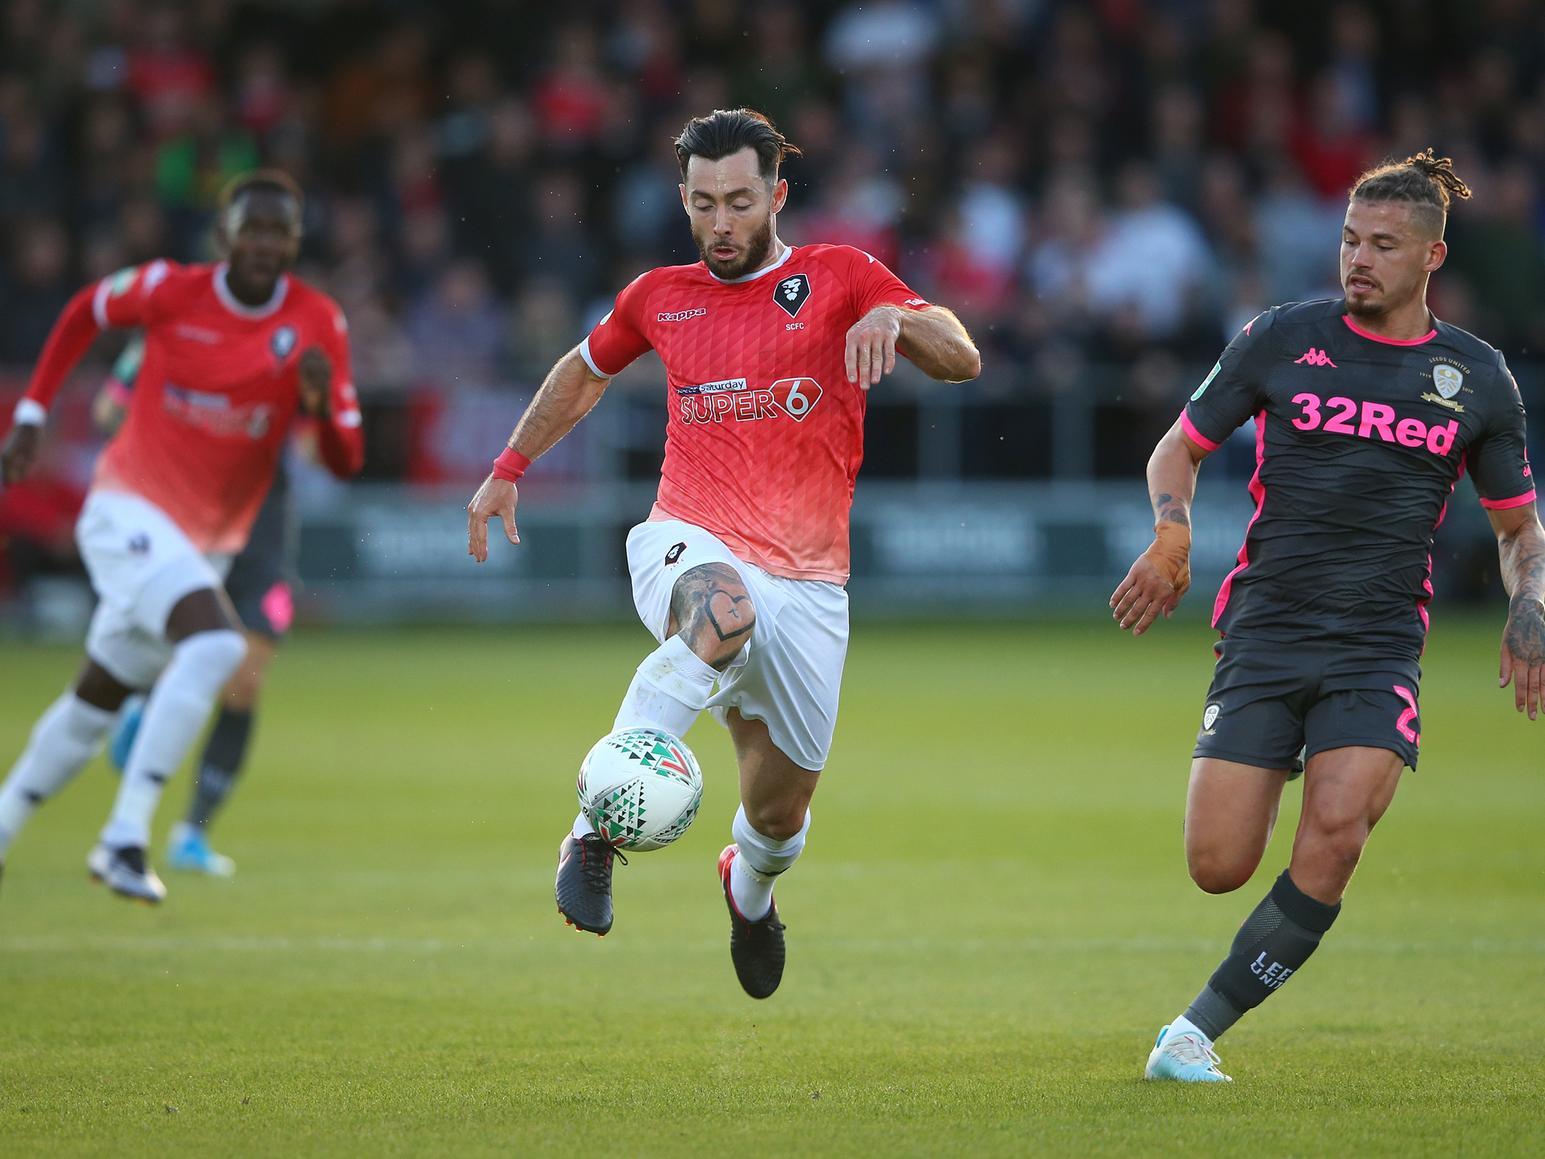 After two loan spells with Rotherham United, Salford snapped him up on a free over the summer. He scored a crucial goal to earn his side a replay against Burton in the FA Cup.